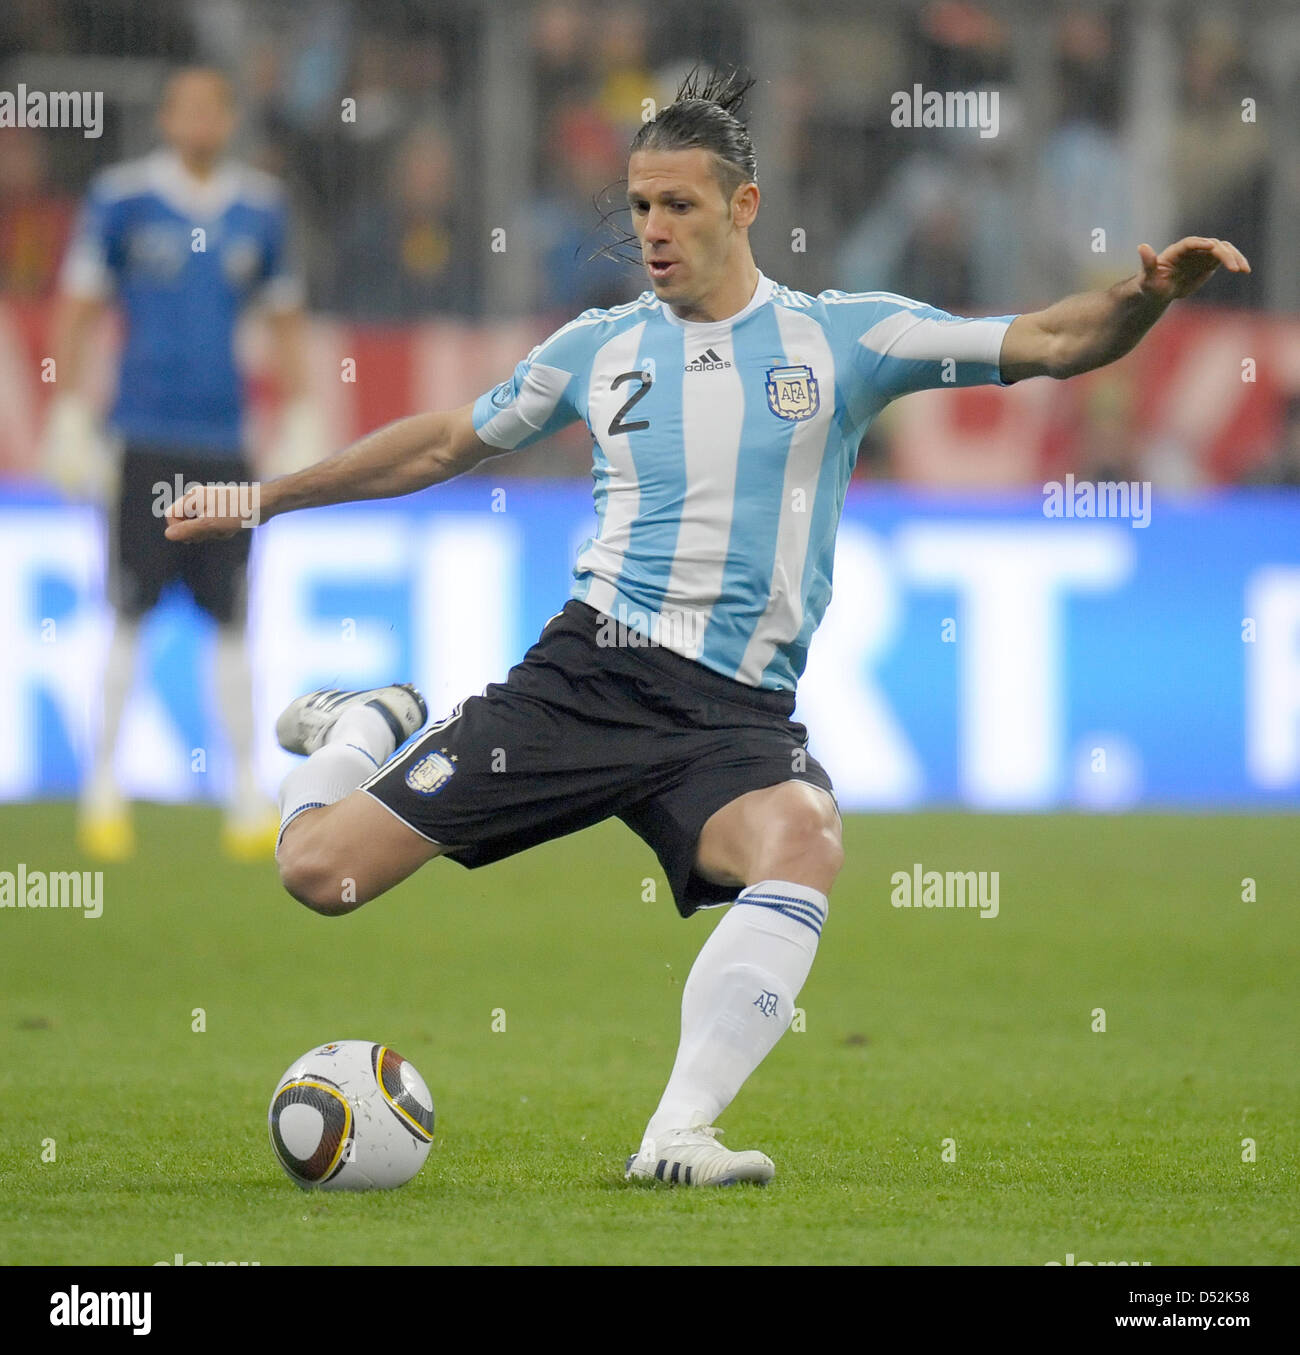 Argentina's Martin Demichelis controls the ball during the test match Germany vs Argentina at AllianzArena stadium in Munich, Germany, 03 March 2010. Argentina won the match 1-0. Photo: Ronald Wittek Stock Photo